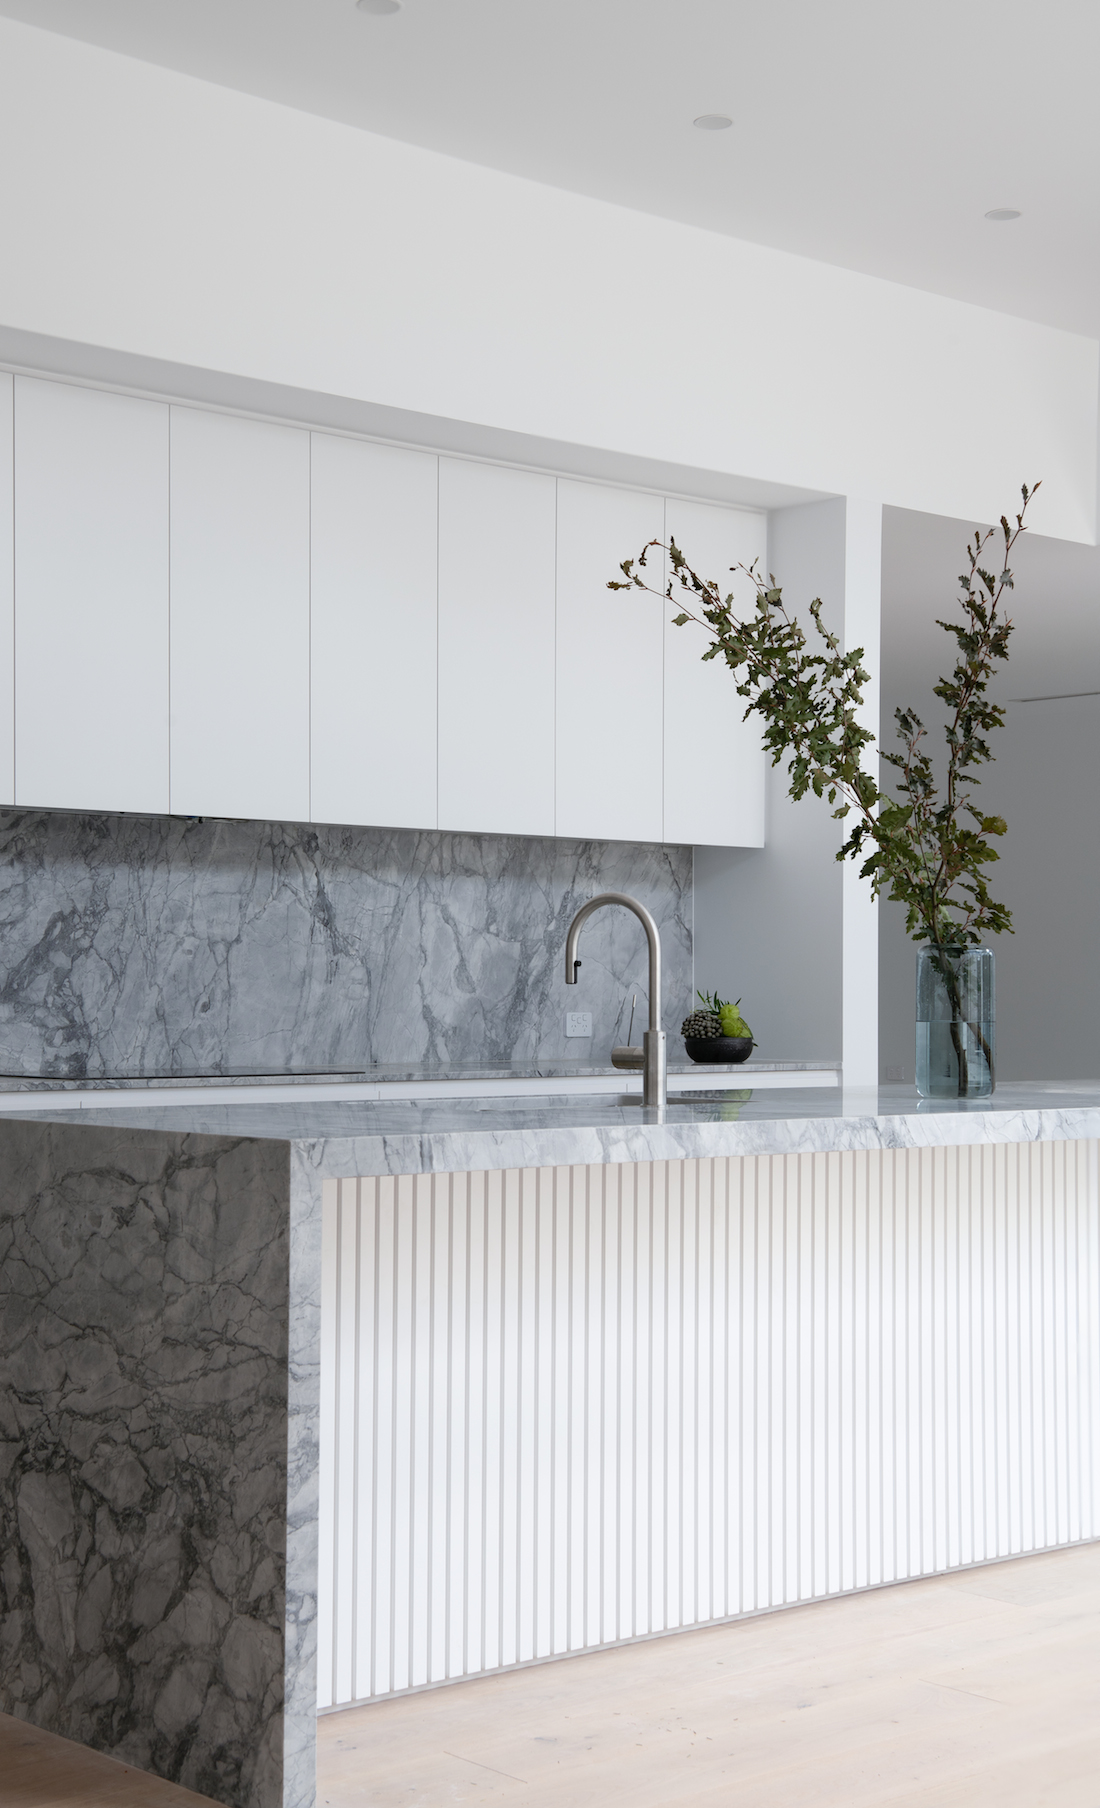 Waterfall stone island bench and white cabinets in kitchen joinery perfection